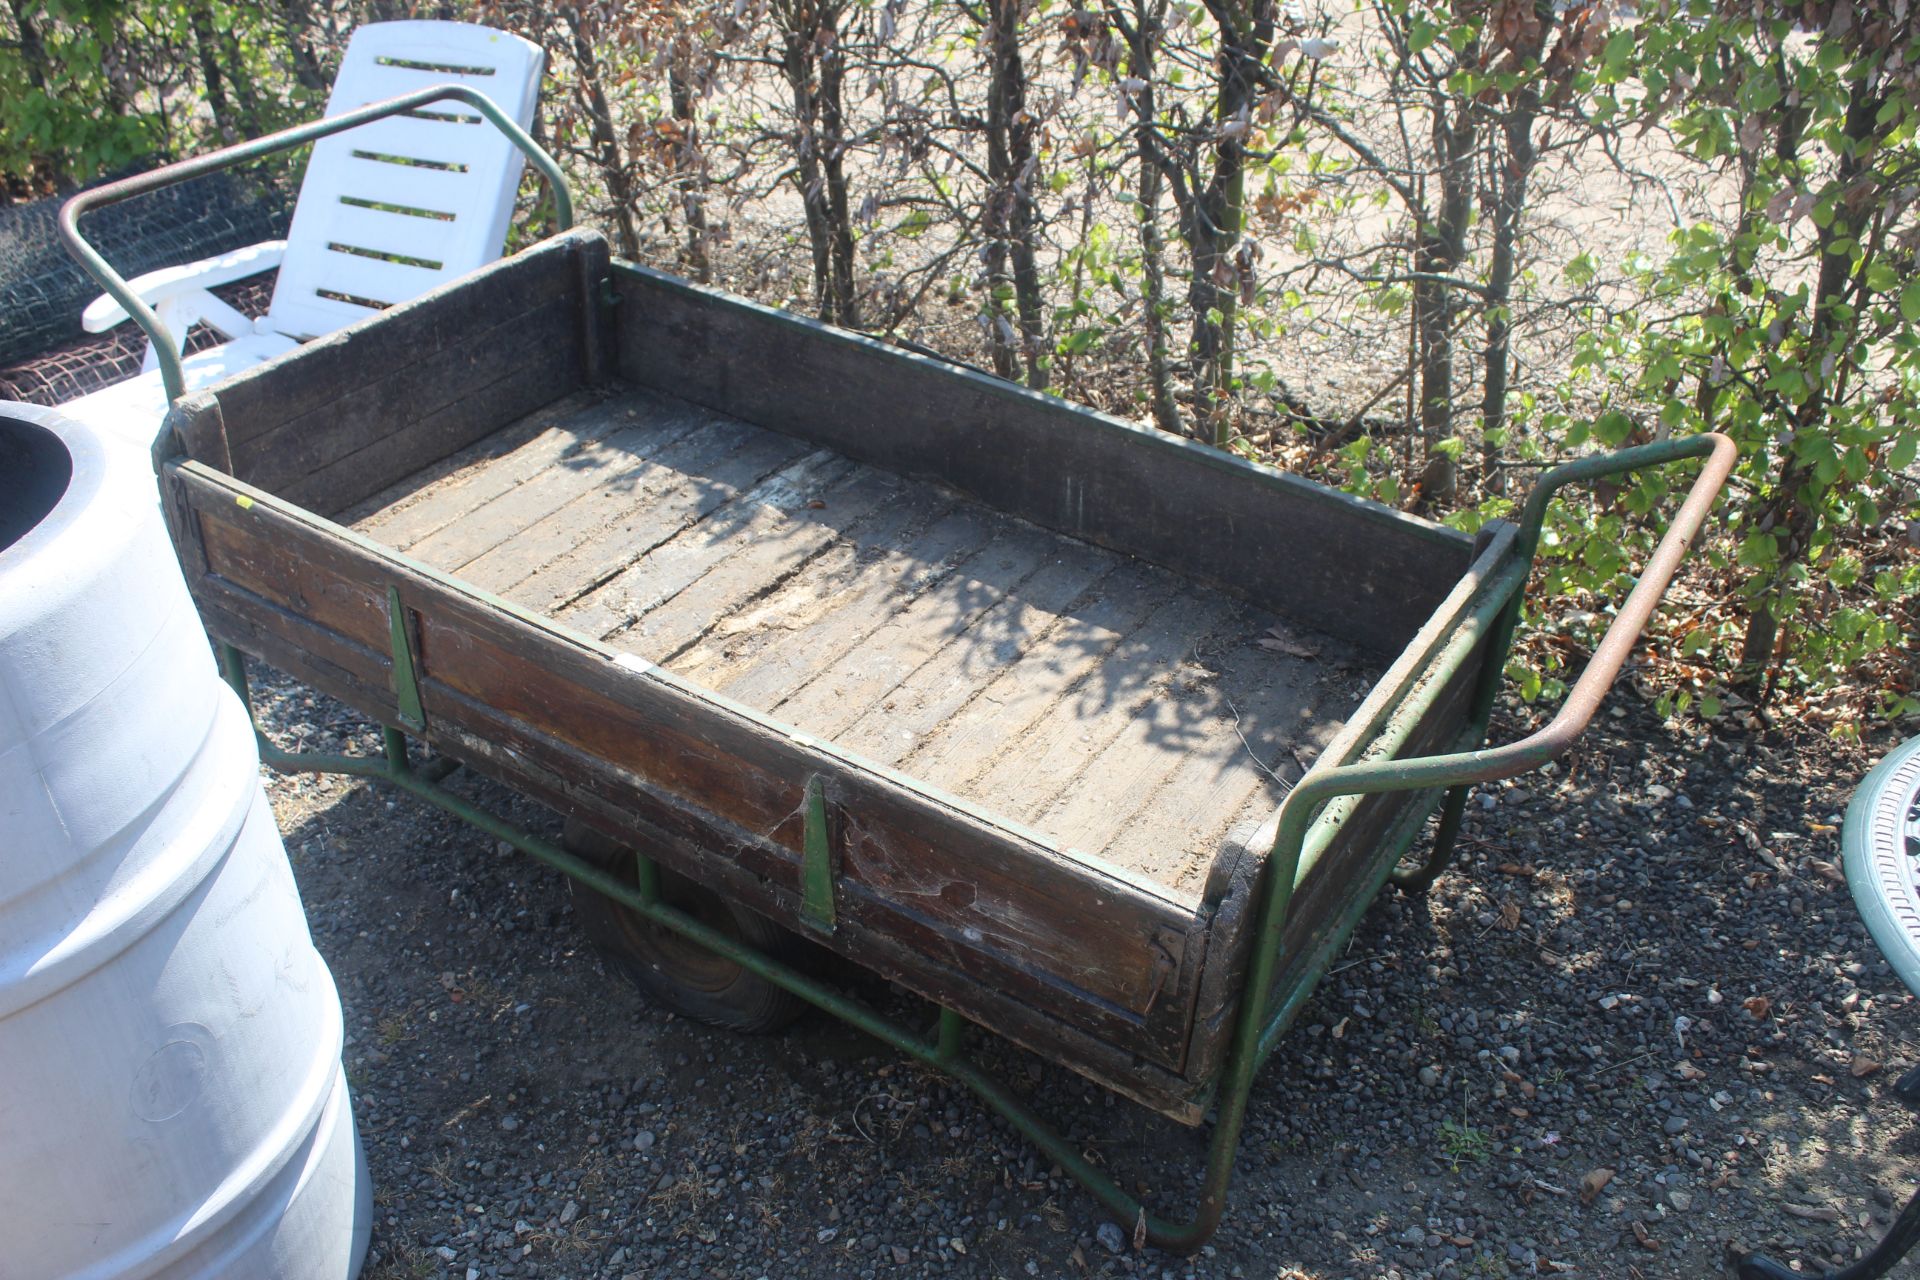 A two wheeled twin handled garden trolley